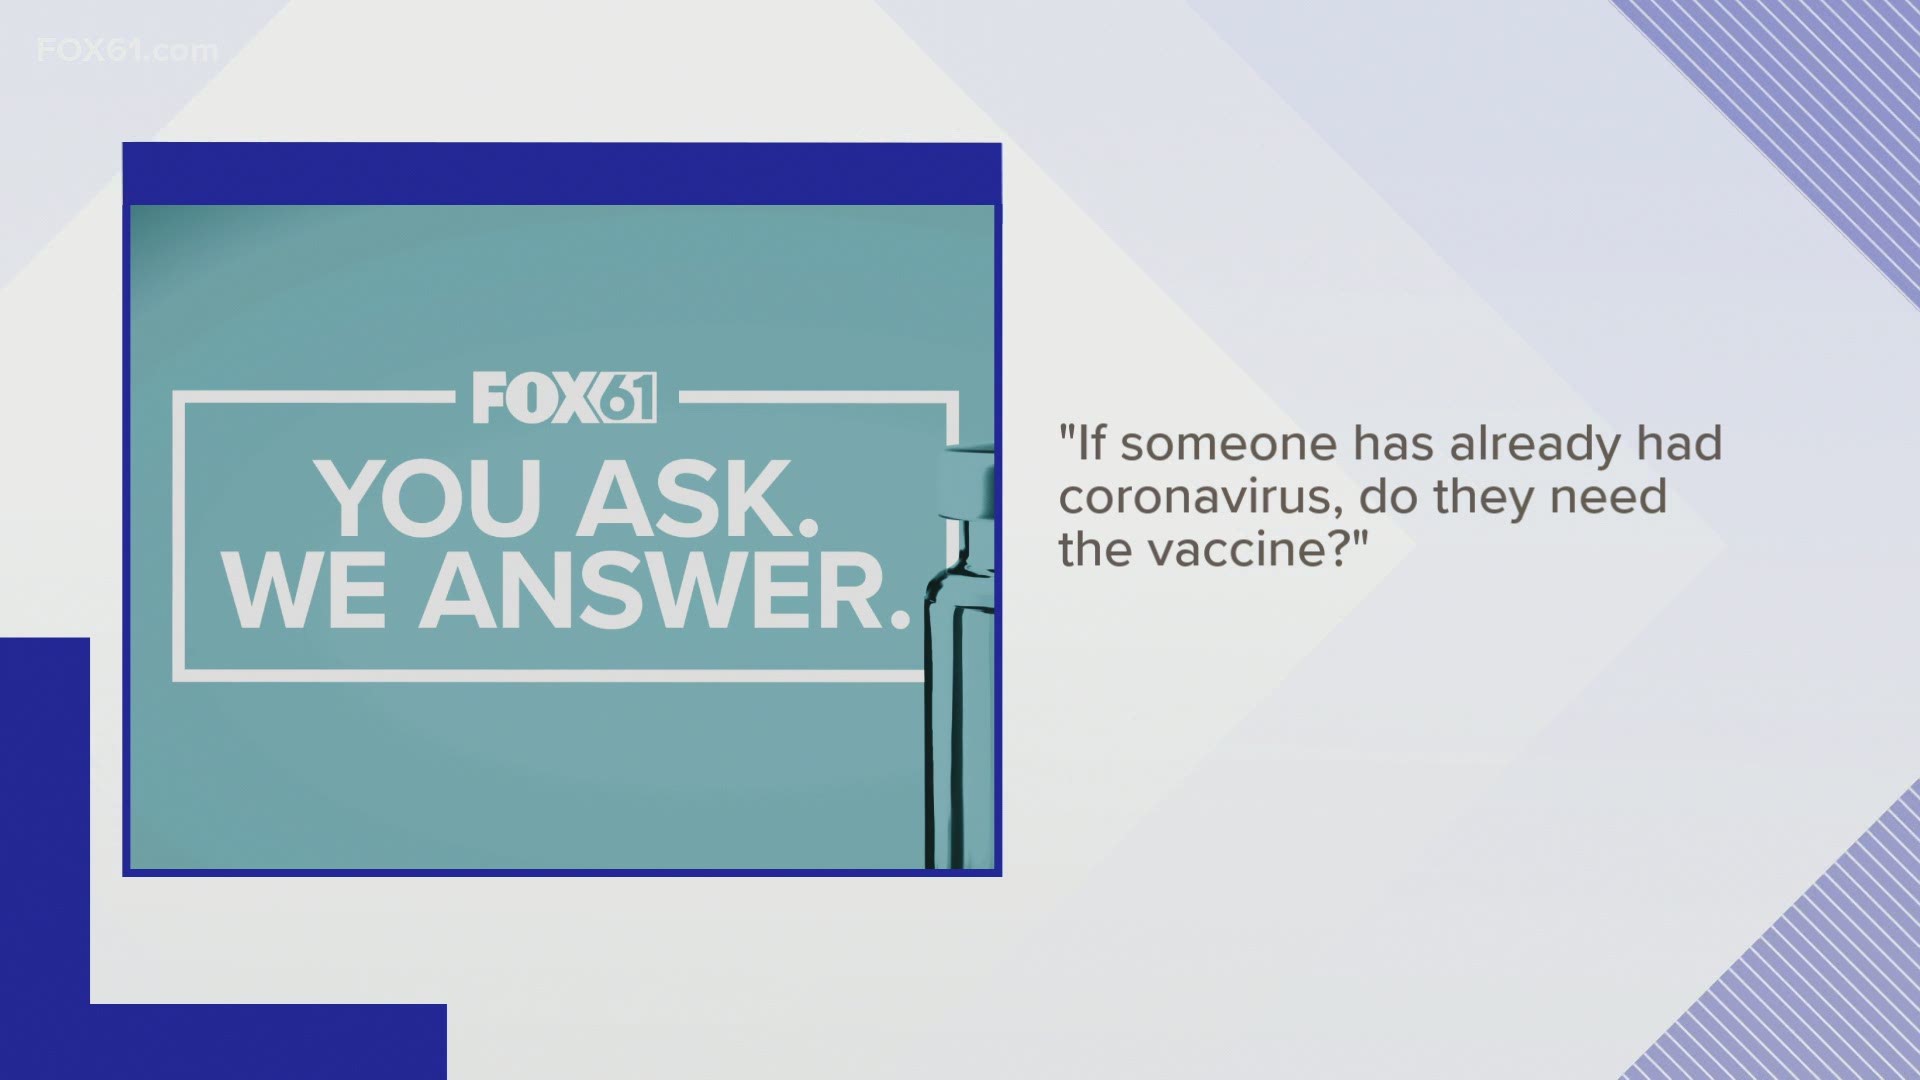 Dr. Syed Hussain from Trinity Health of New England answers your COVID-19 vaccine questions